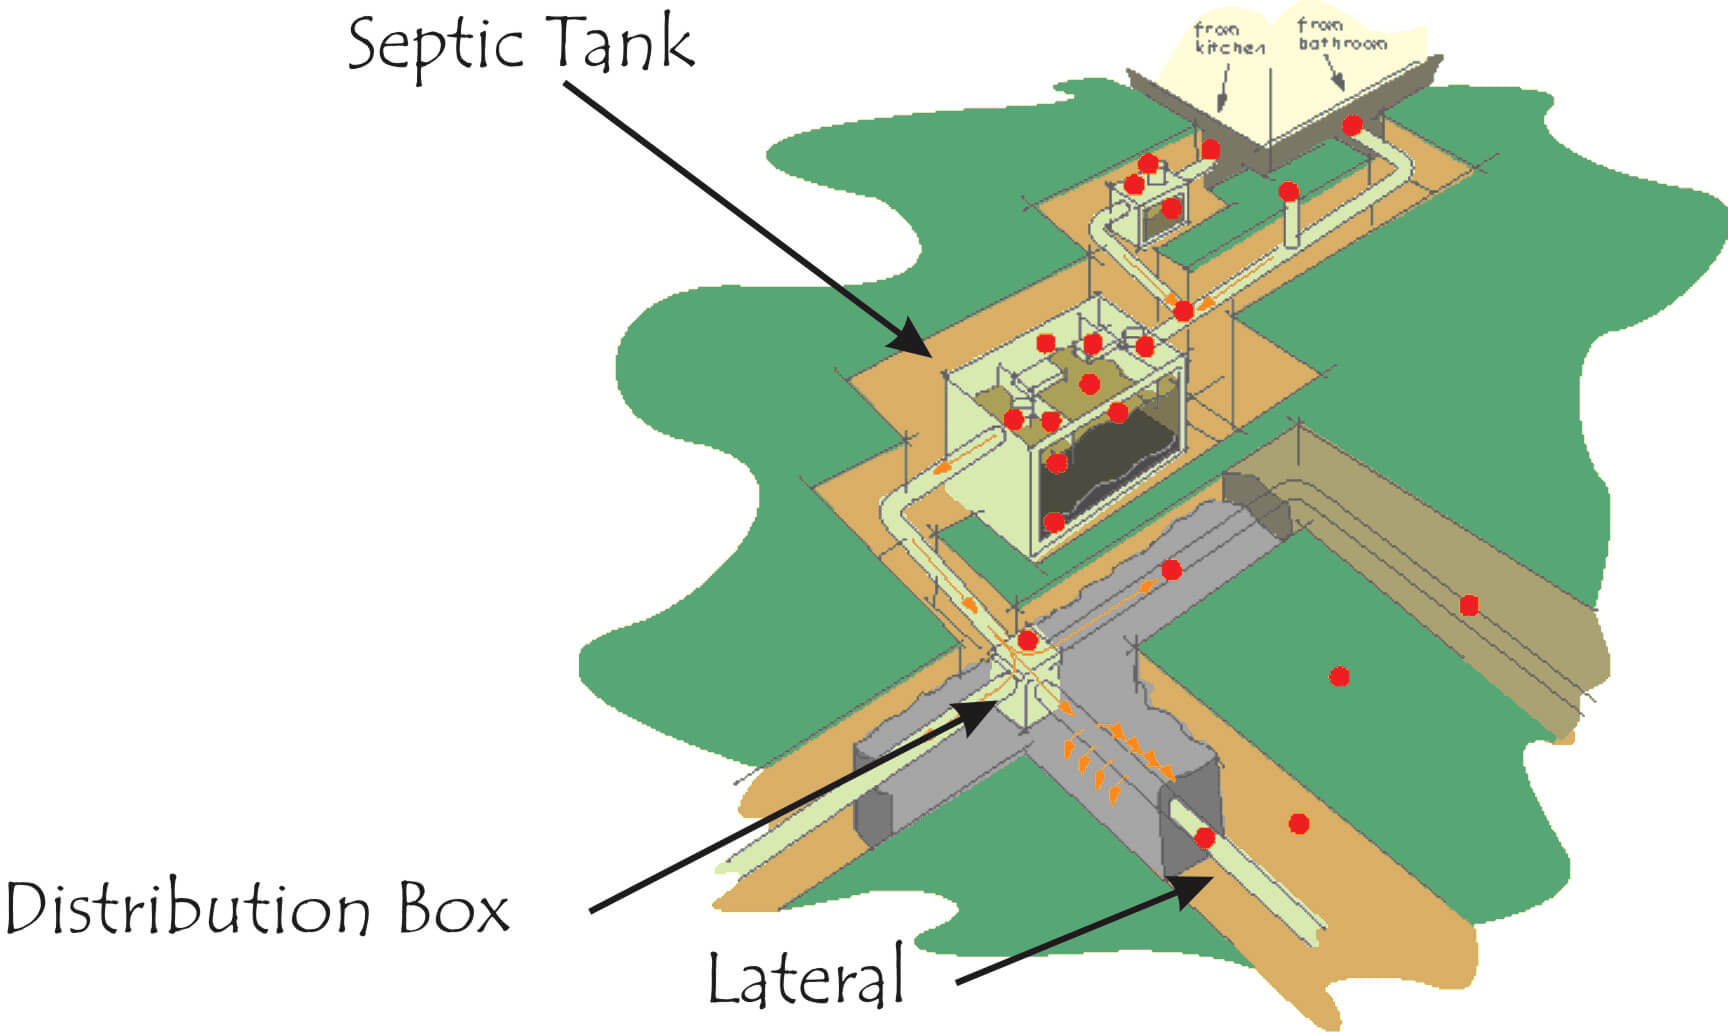 Septic tanks explained | septic tanks Ireland | septic tank systems ...